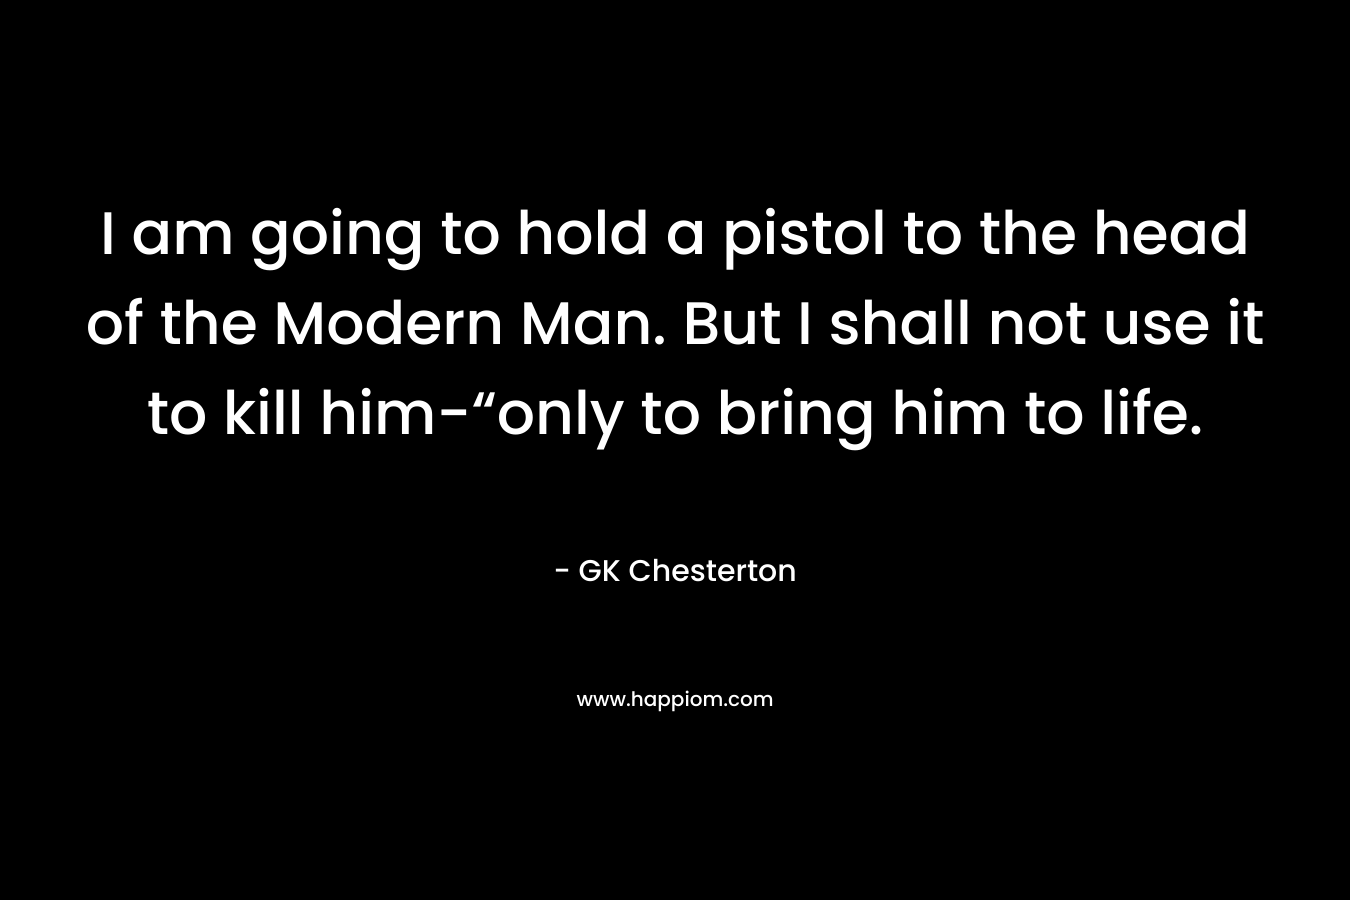 I am going to hold a pistol to the head of the Modern Man. But I shall not use it to kill him-“only to bring him to life.